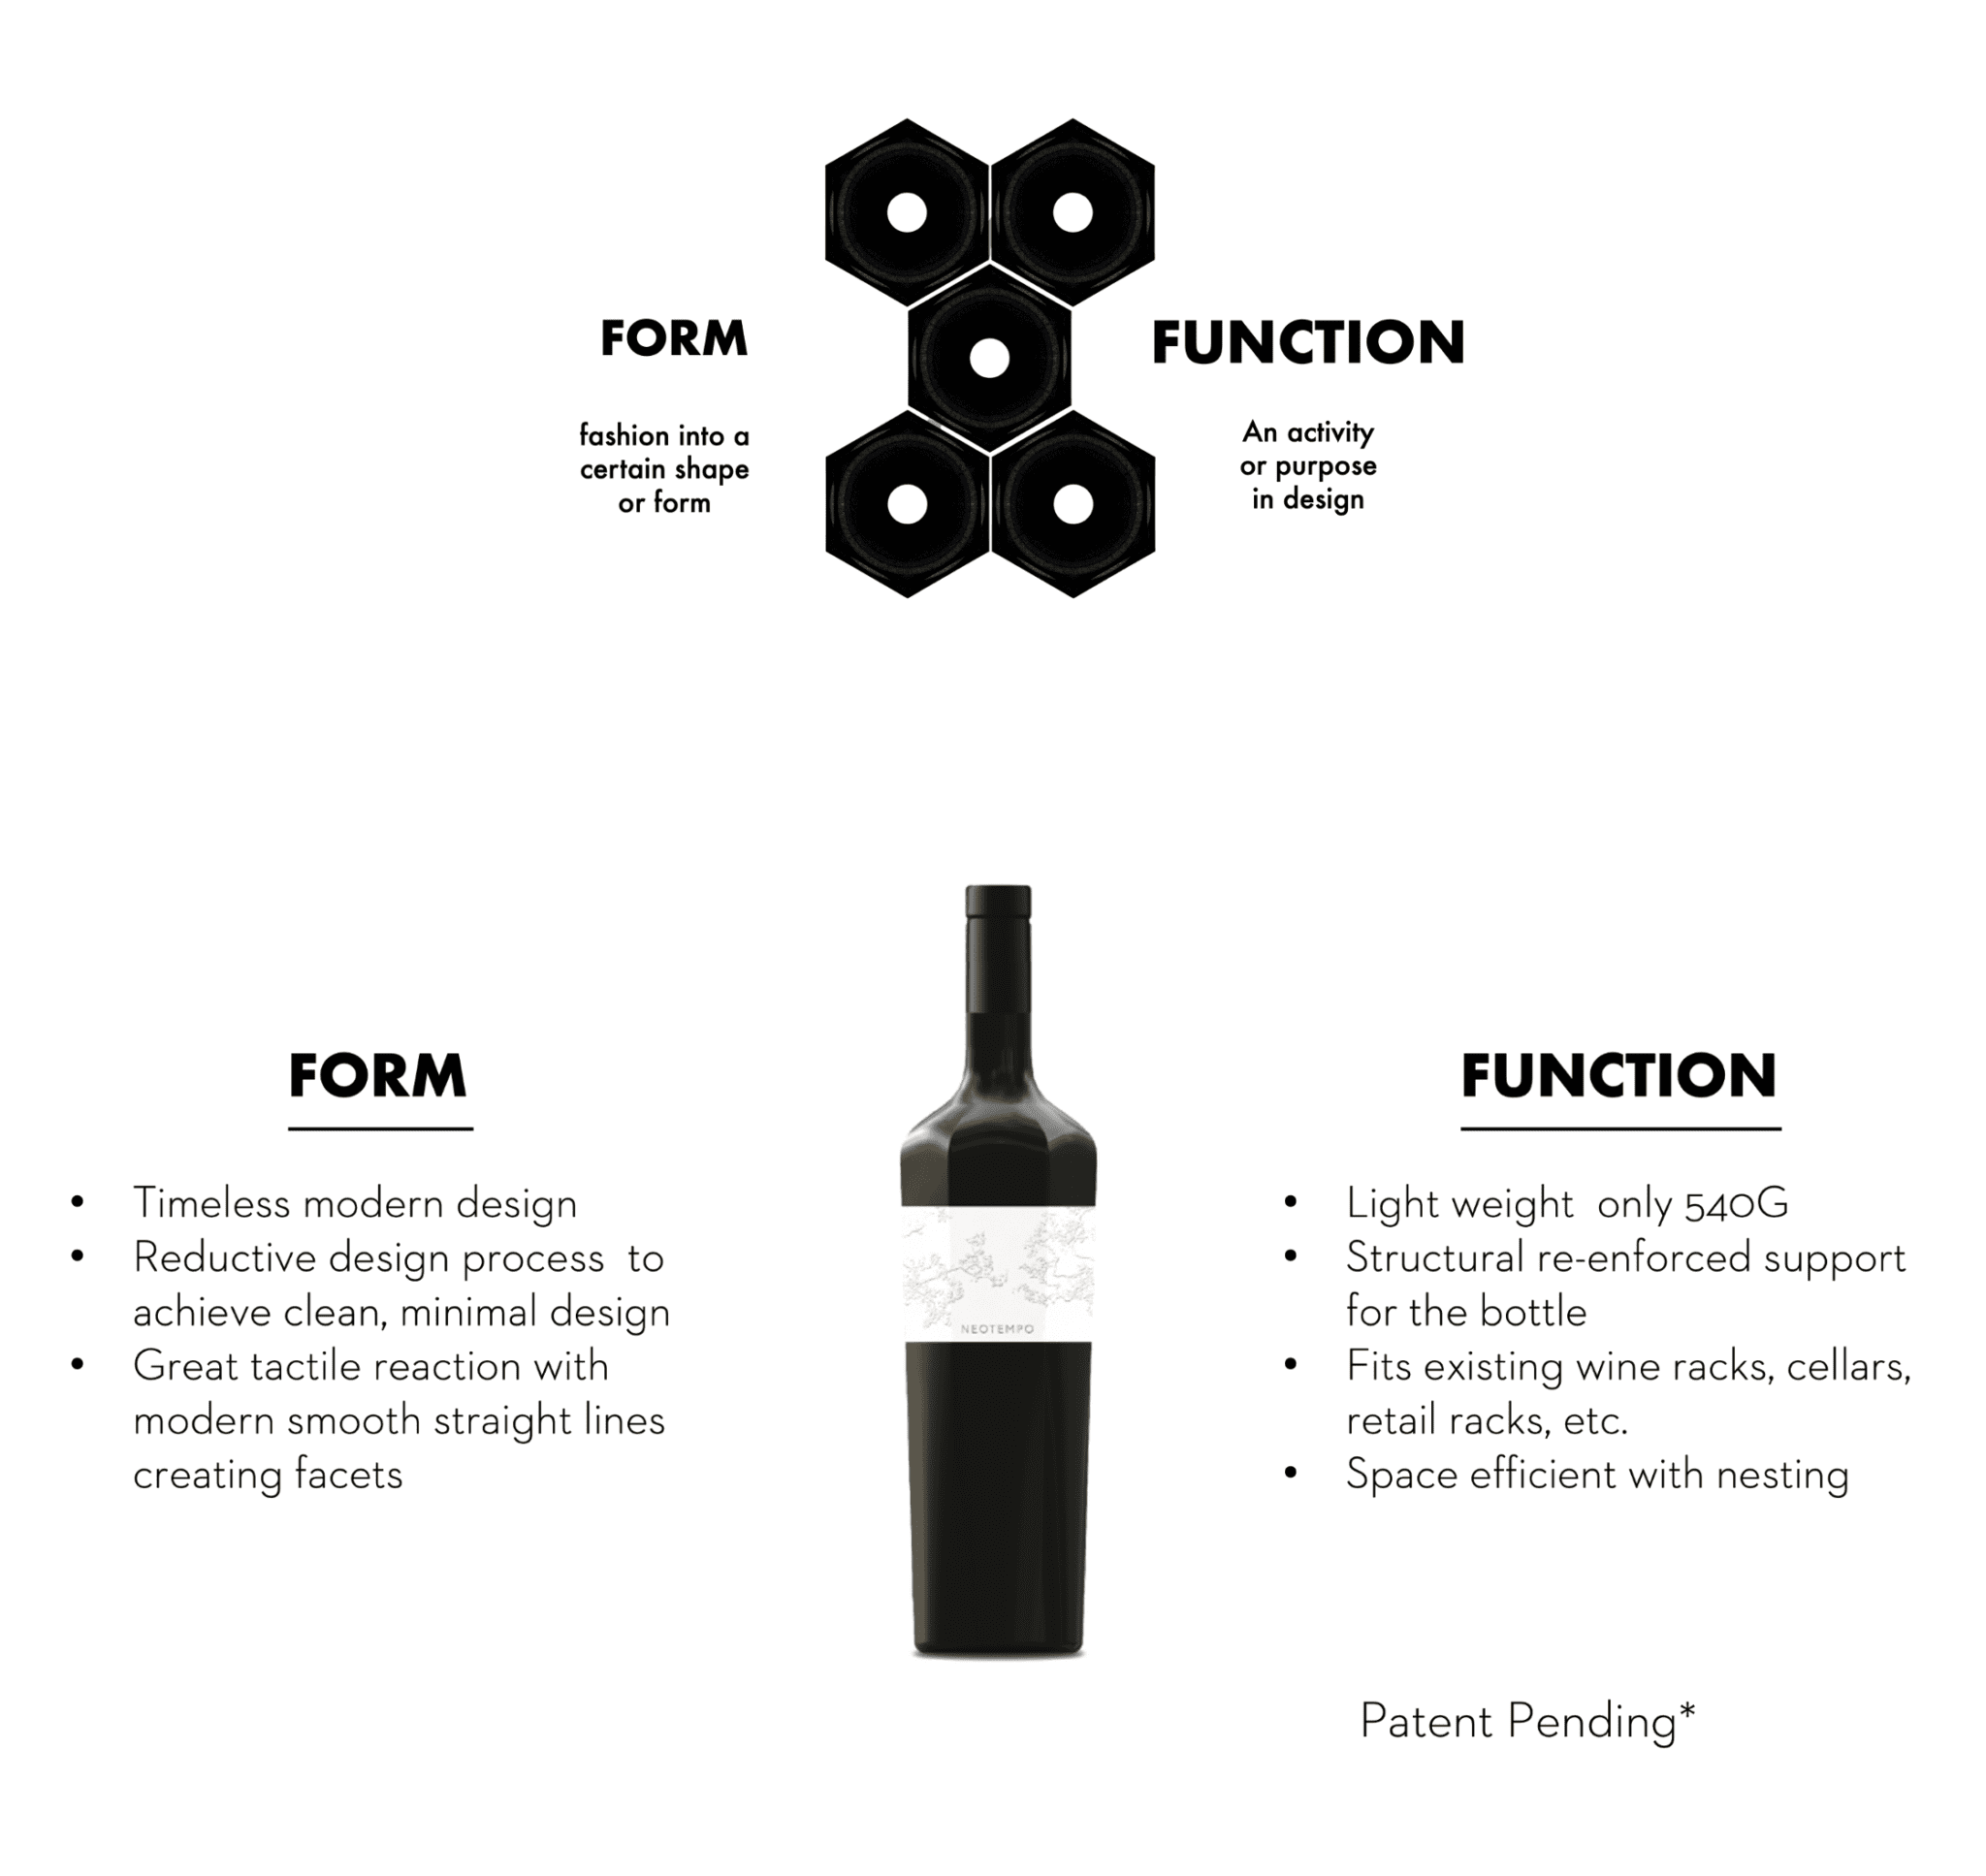 Form and Function description of the hexagon shaped bottles